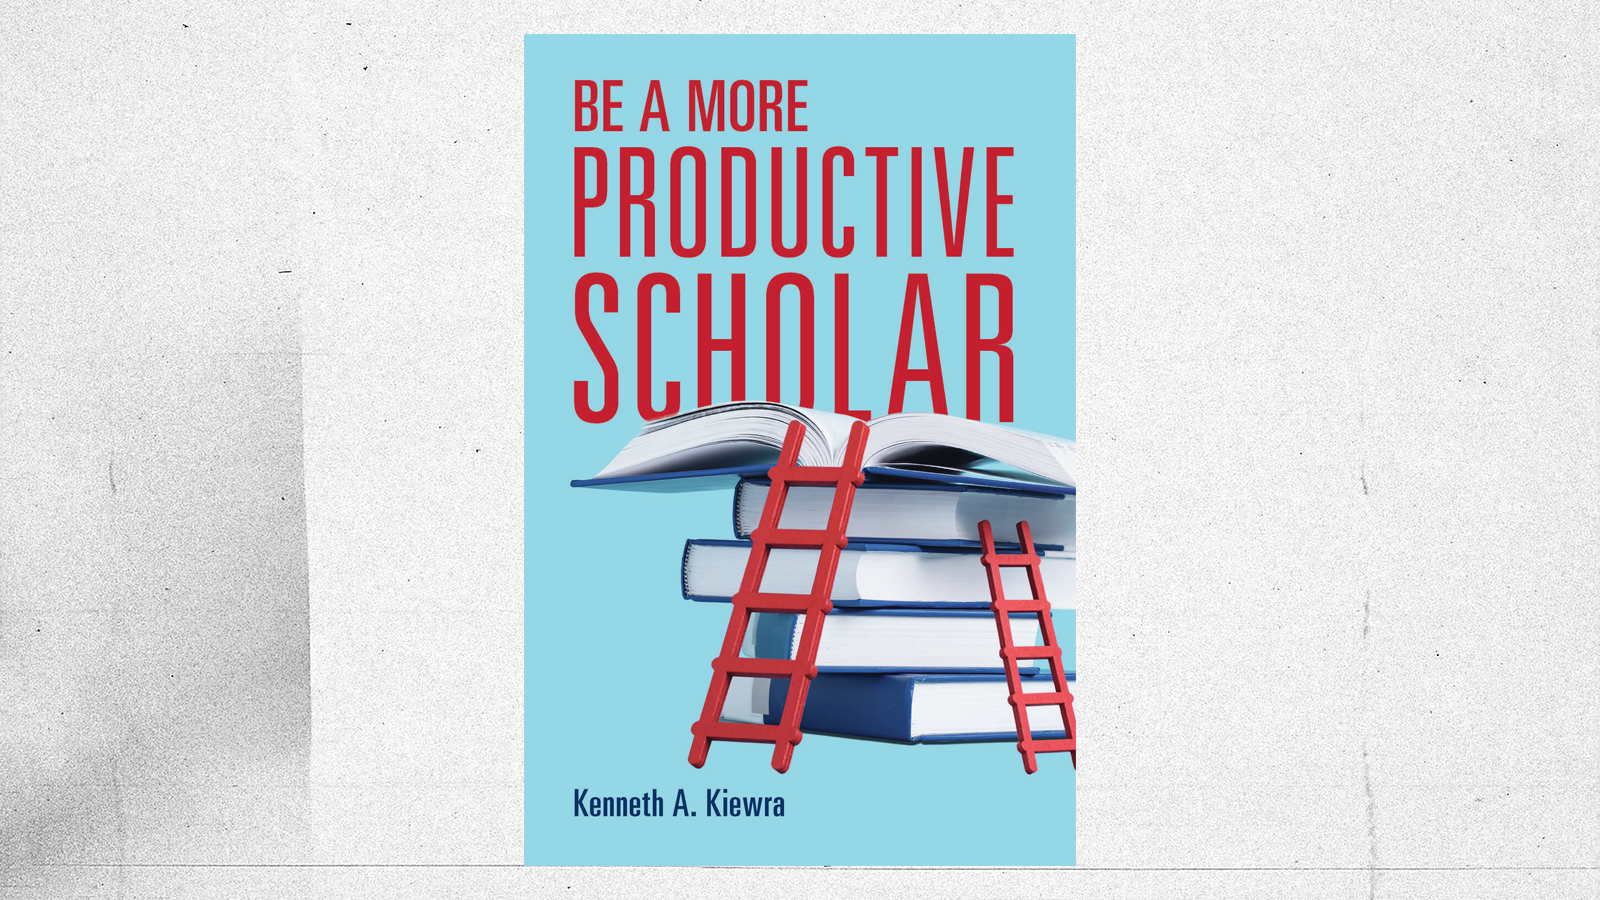 Be a More Productive Scholar book cover